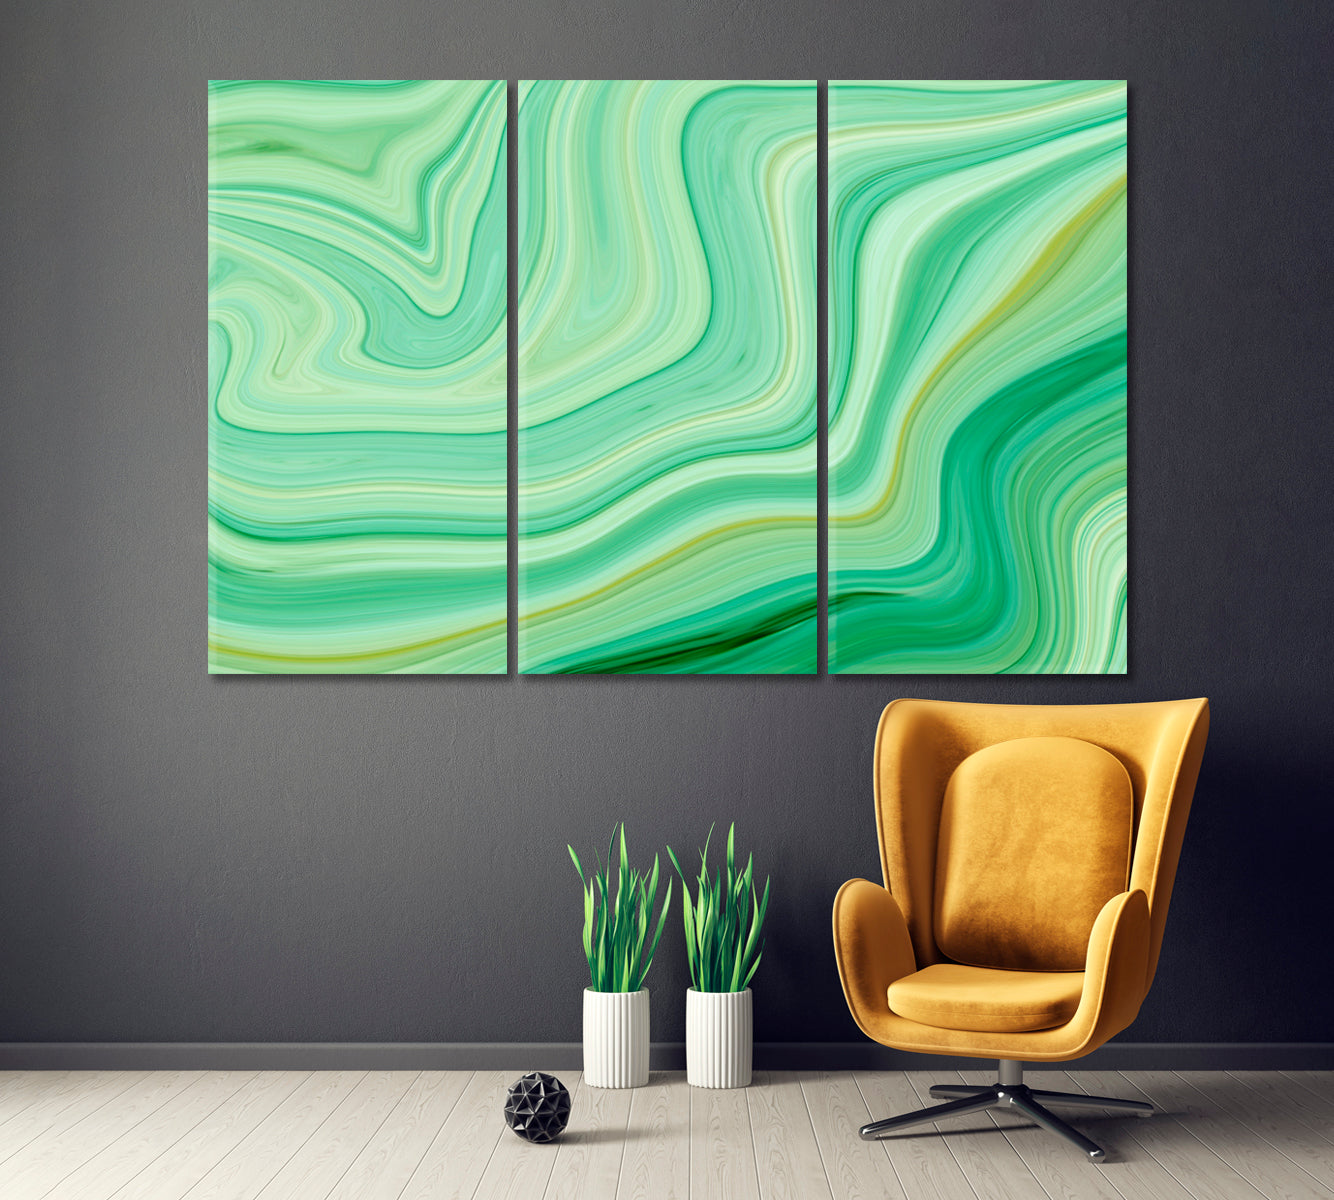 Green Marble Ink Design Canvas Print ArtLexy 3 Panels 36"x24" inches 